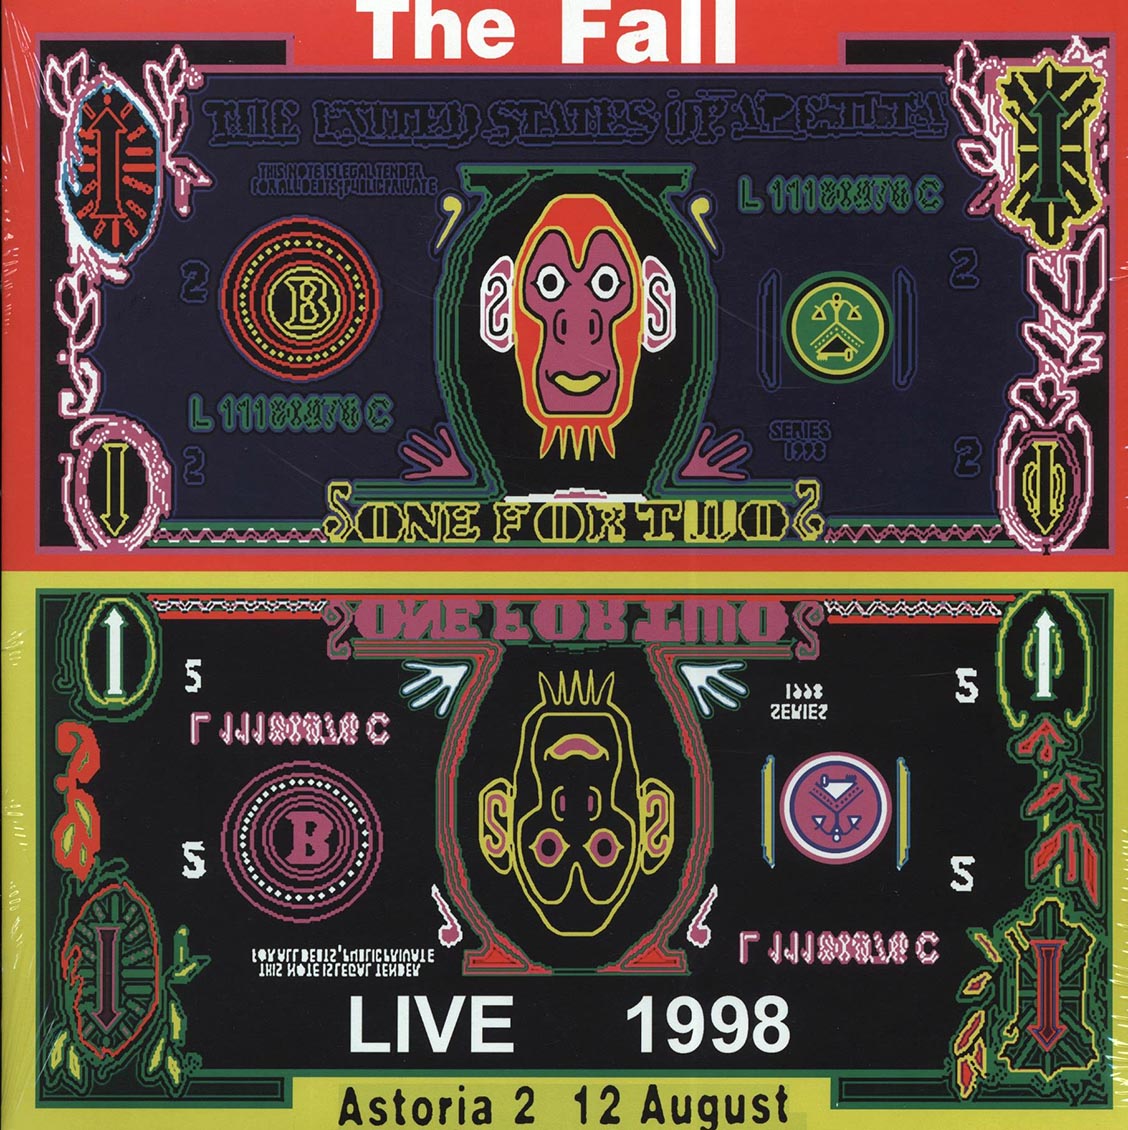 The Fall - Live 1998: Astoria 2, 12 August